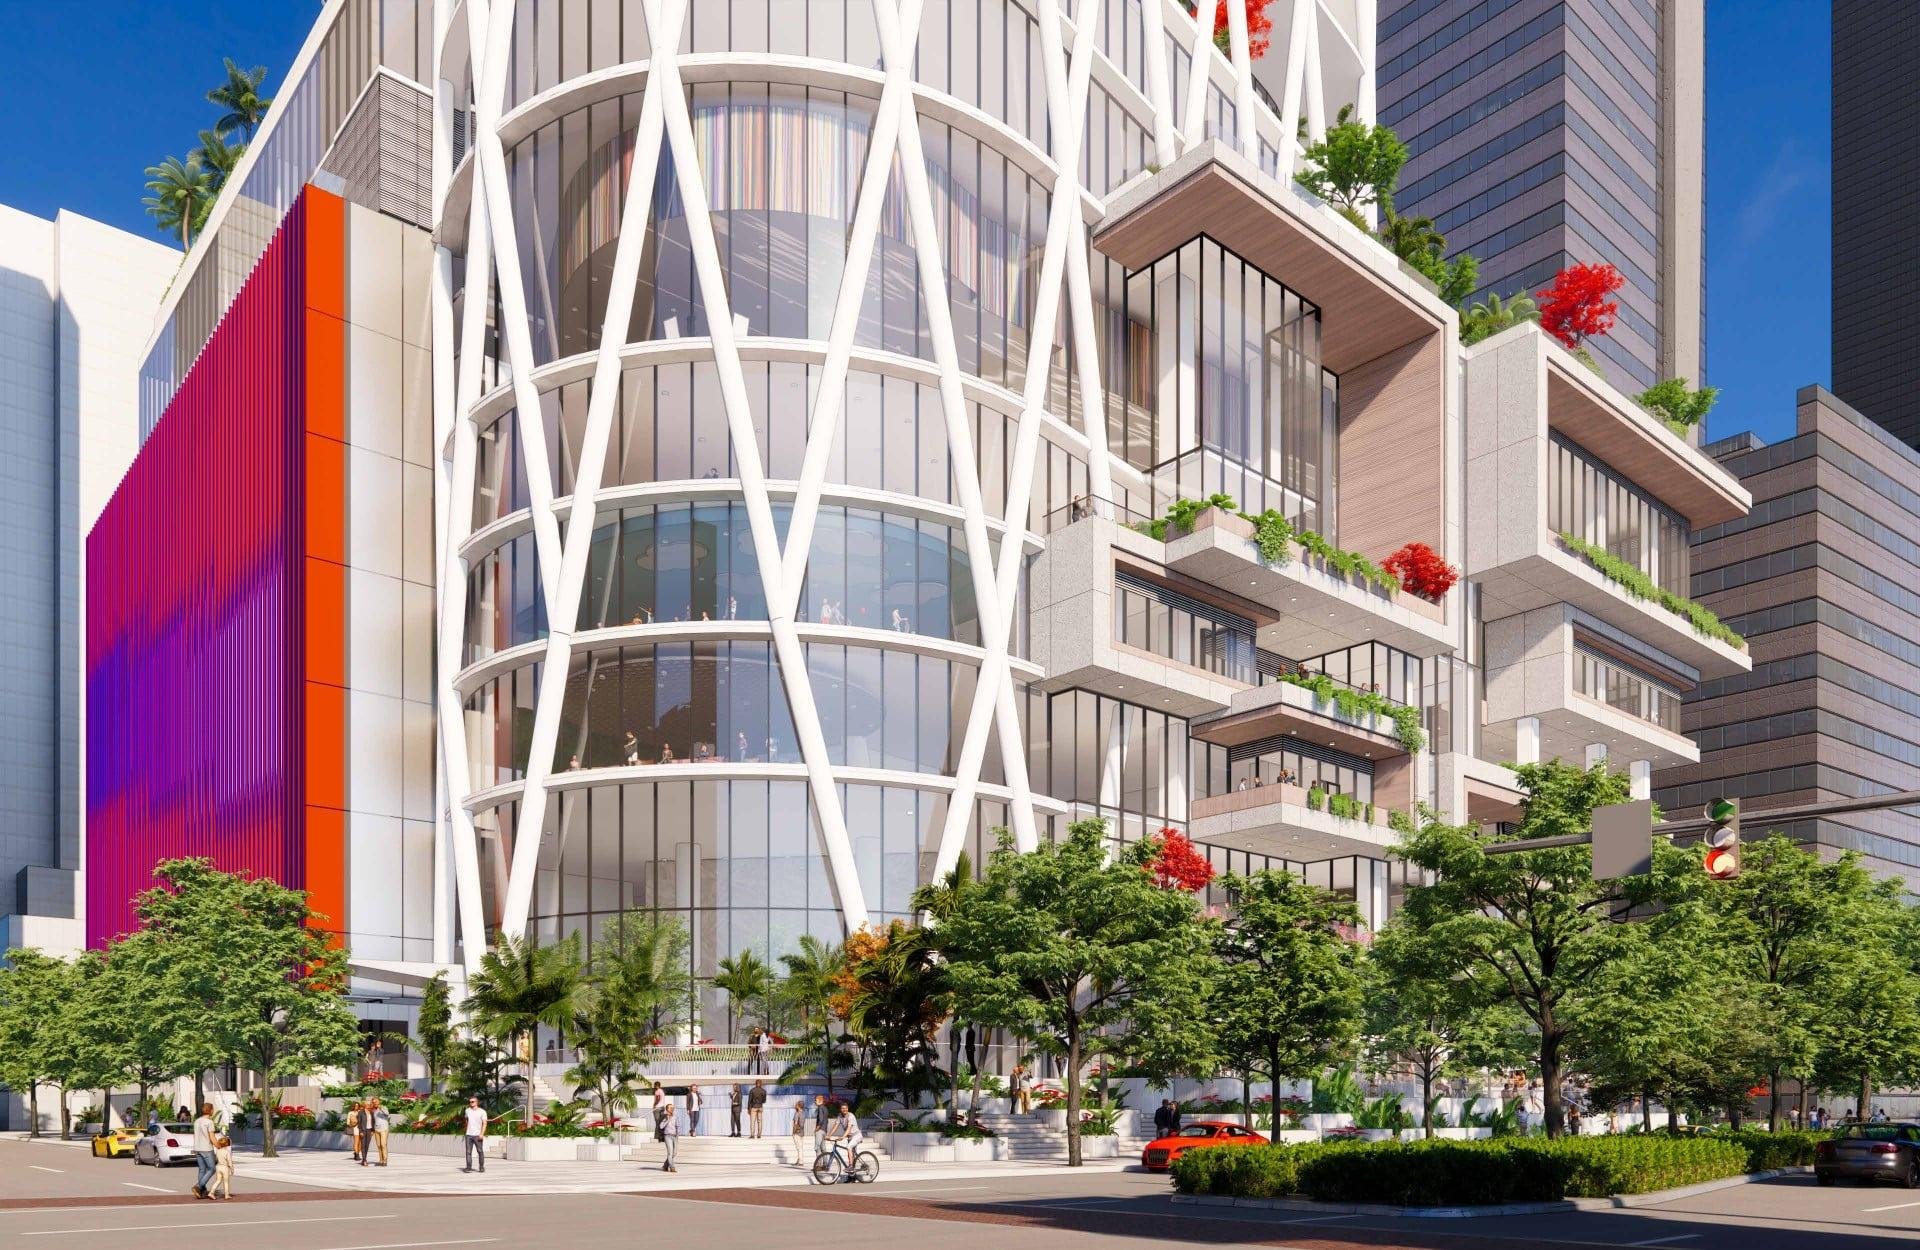 Plans Filed For Santandar Tower Set To Rise 765' On Brickell Ave 7.jpeg